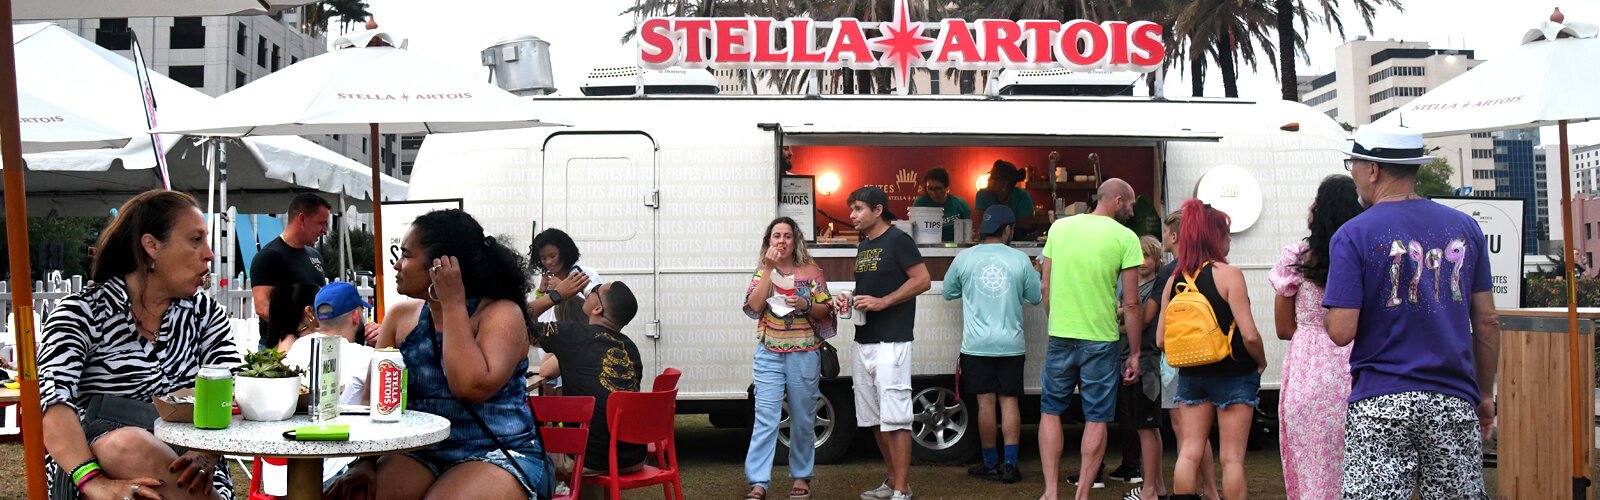 A beer tent and several food trucks with a variety of tasty offerings kept festival-goers satisfied and ready to enjoy other Tampa Riverfest activities, live music and events.